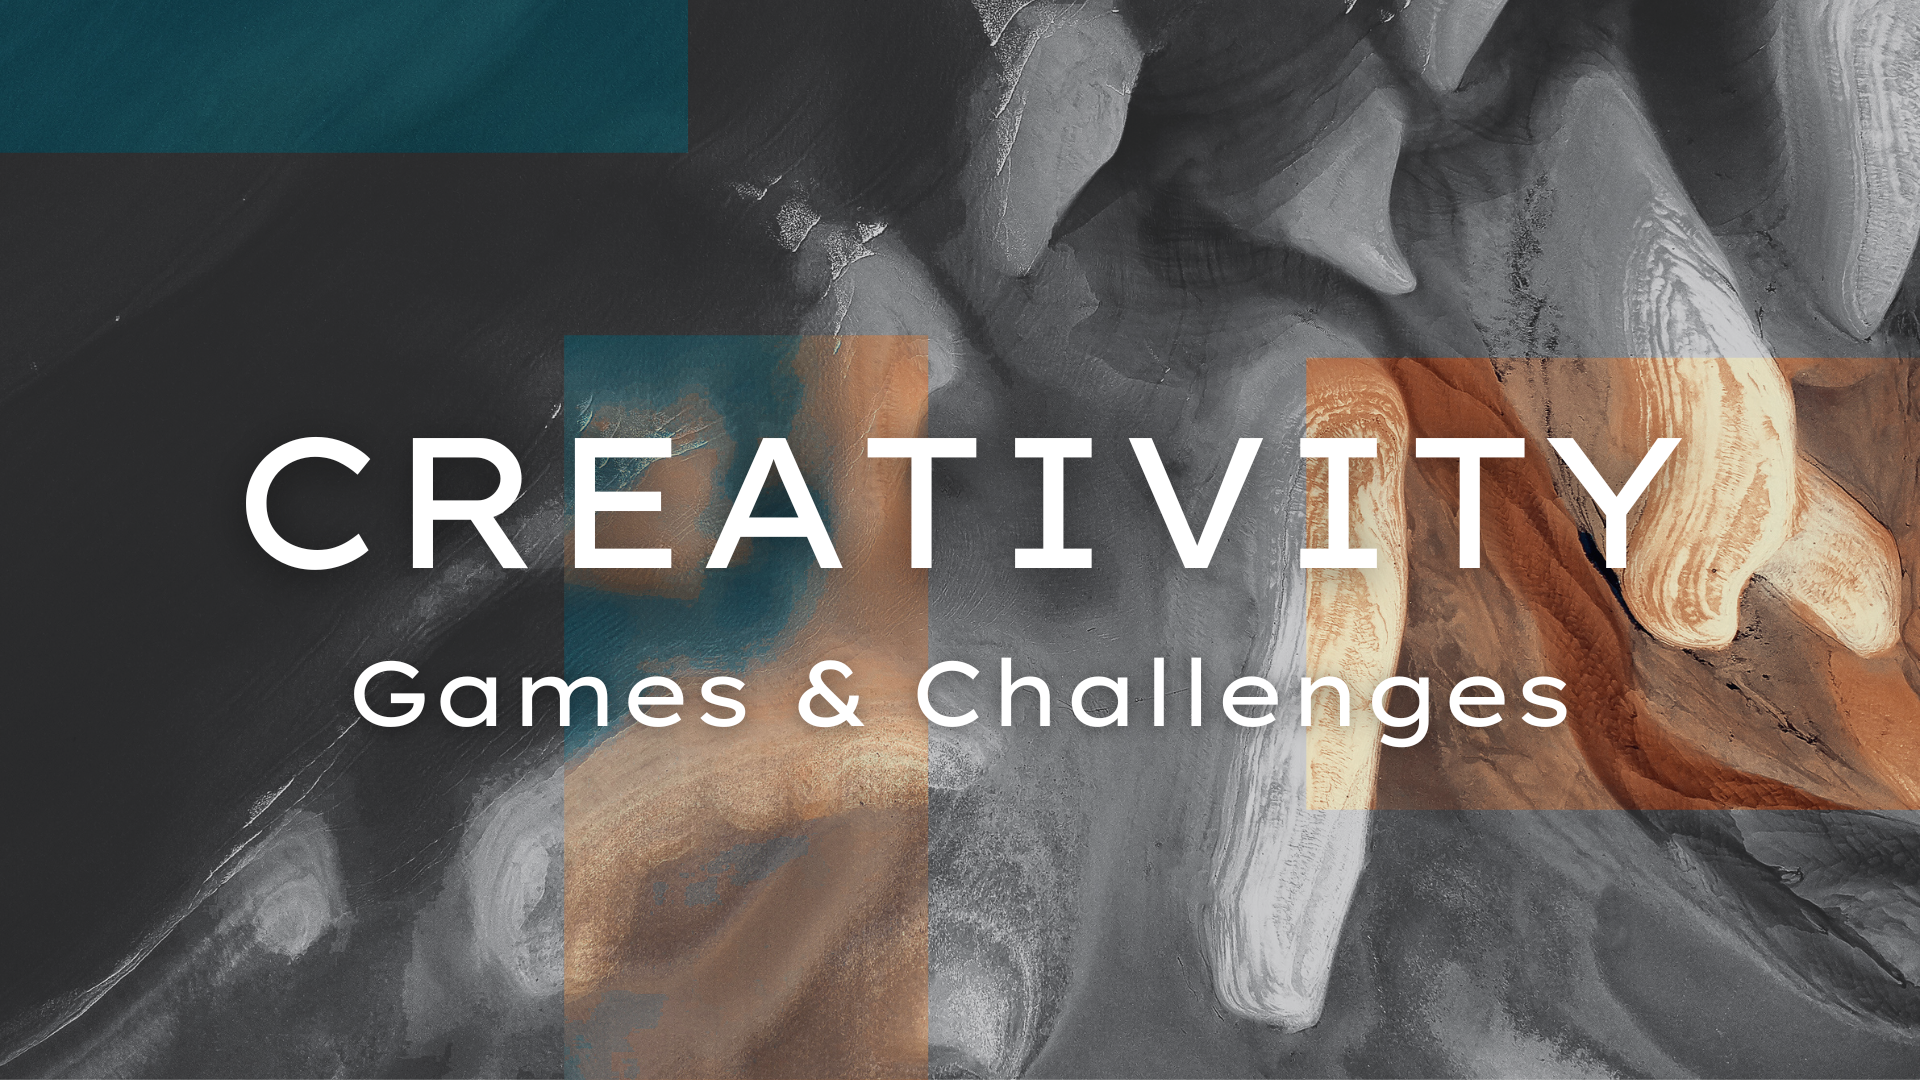 Creativity Games & Challenges To Fuel Your Work